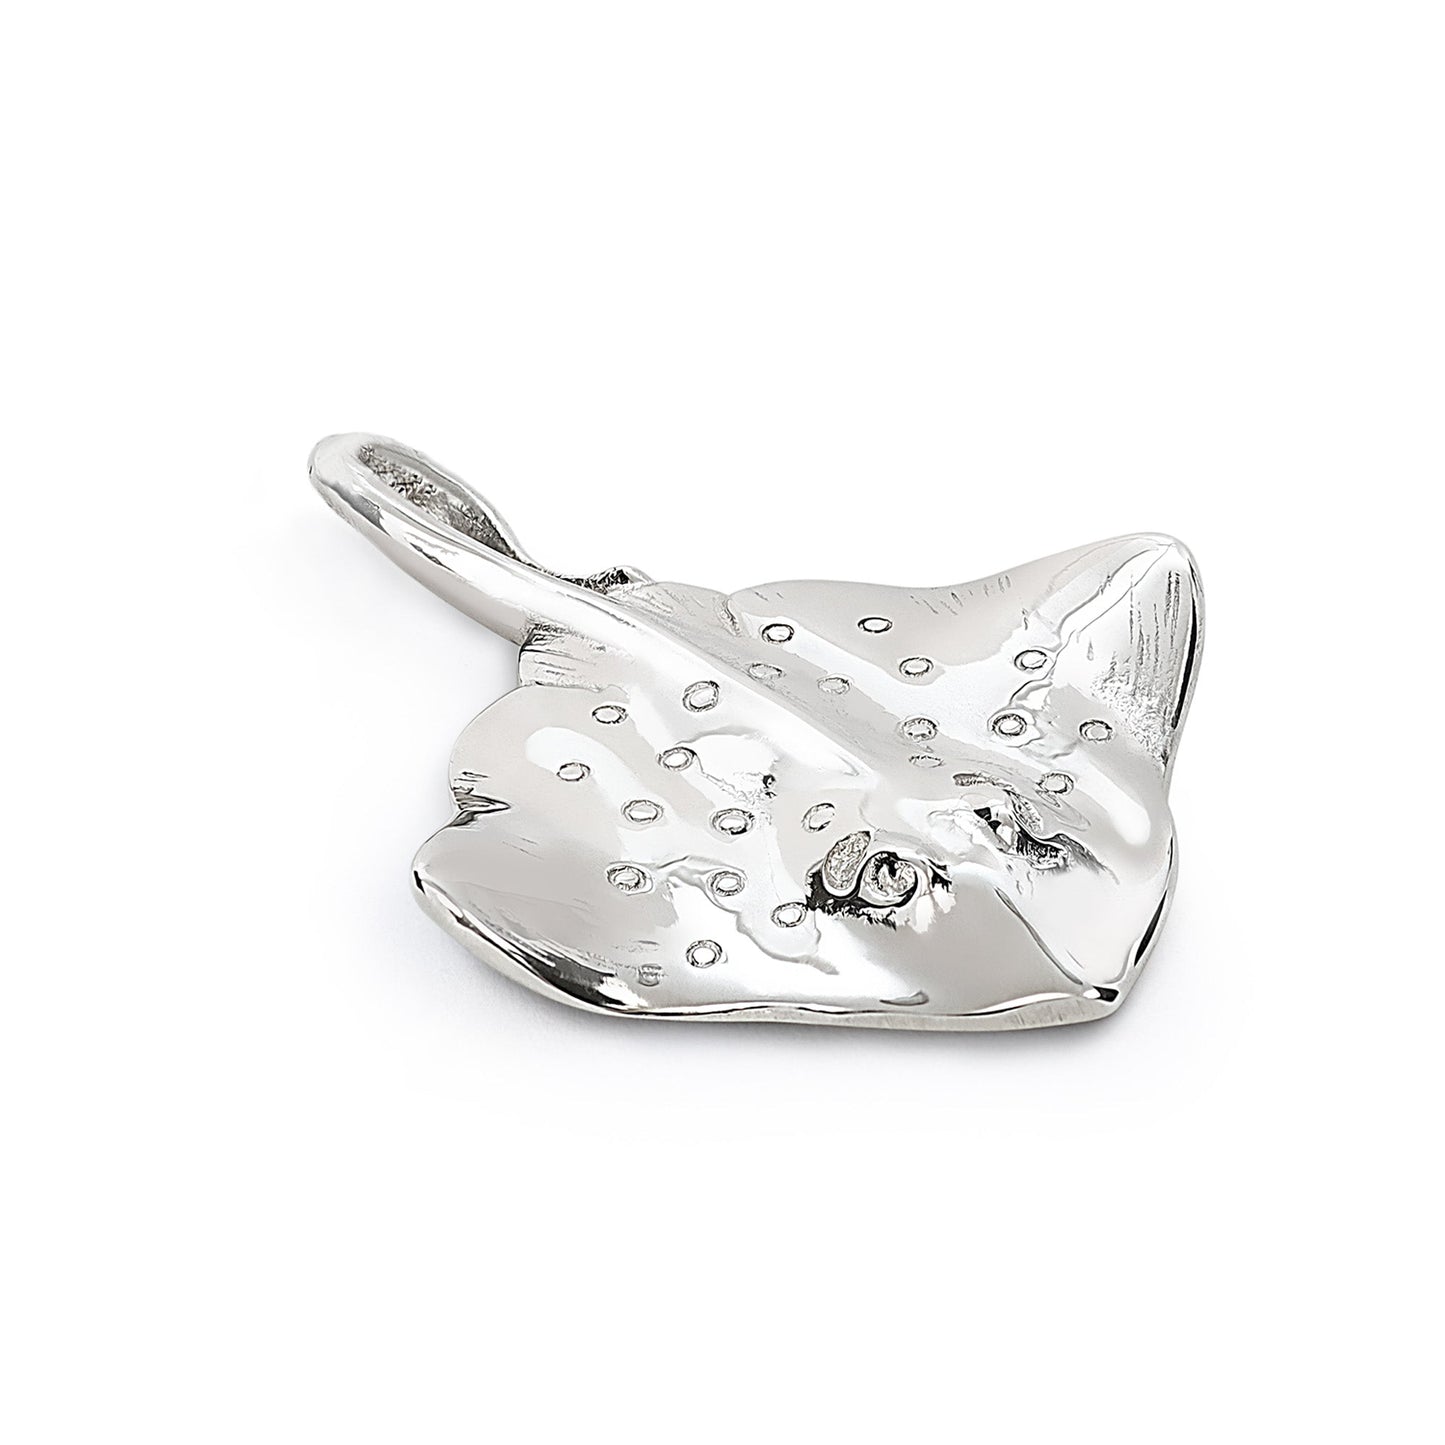 Stingray Necklace for Women Sterling Silver- Ray Necklace for Women, Sterling Silver Stingray Pendant, Stingray Jewelry, Scuba Diving Jewelry - The Tool Store